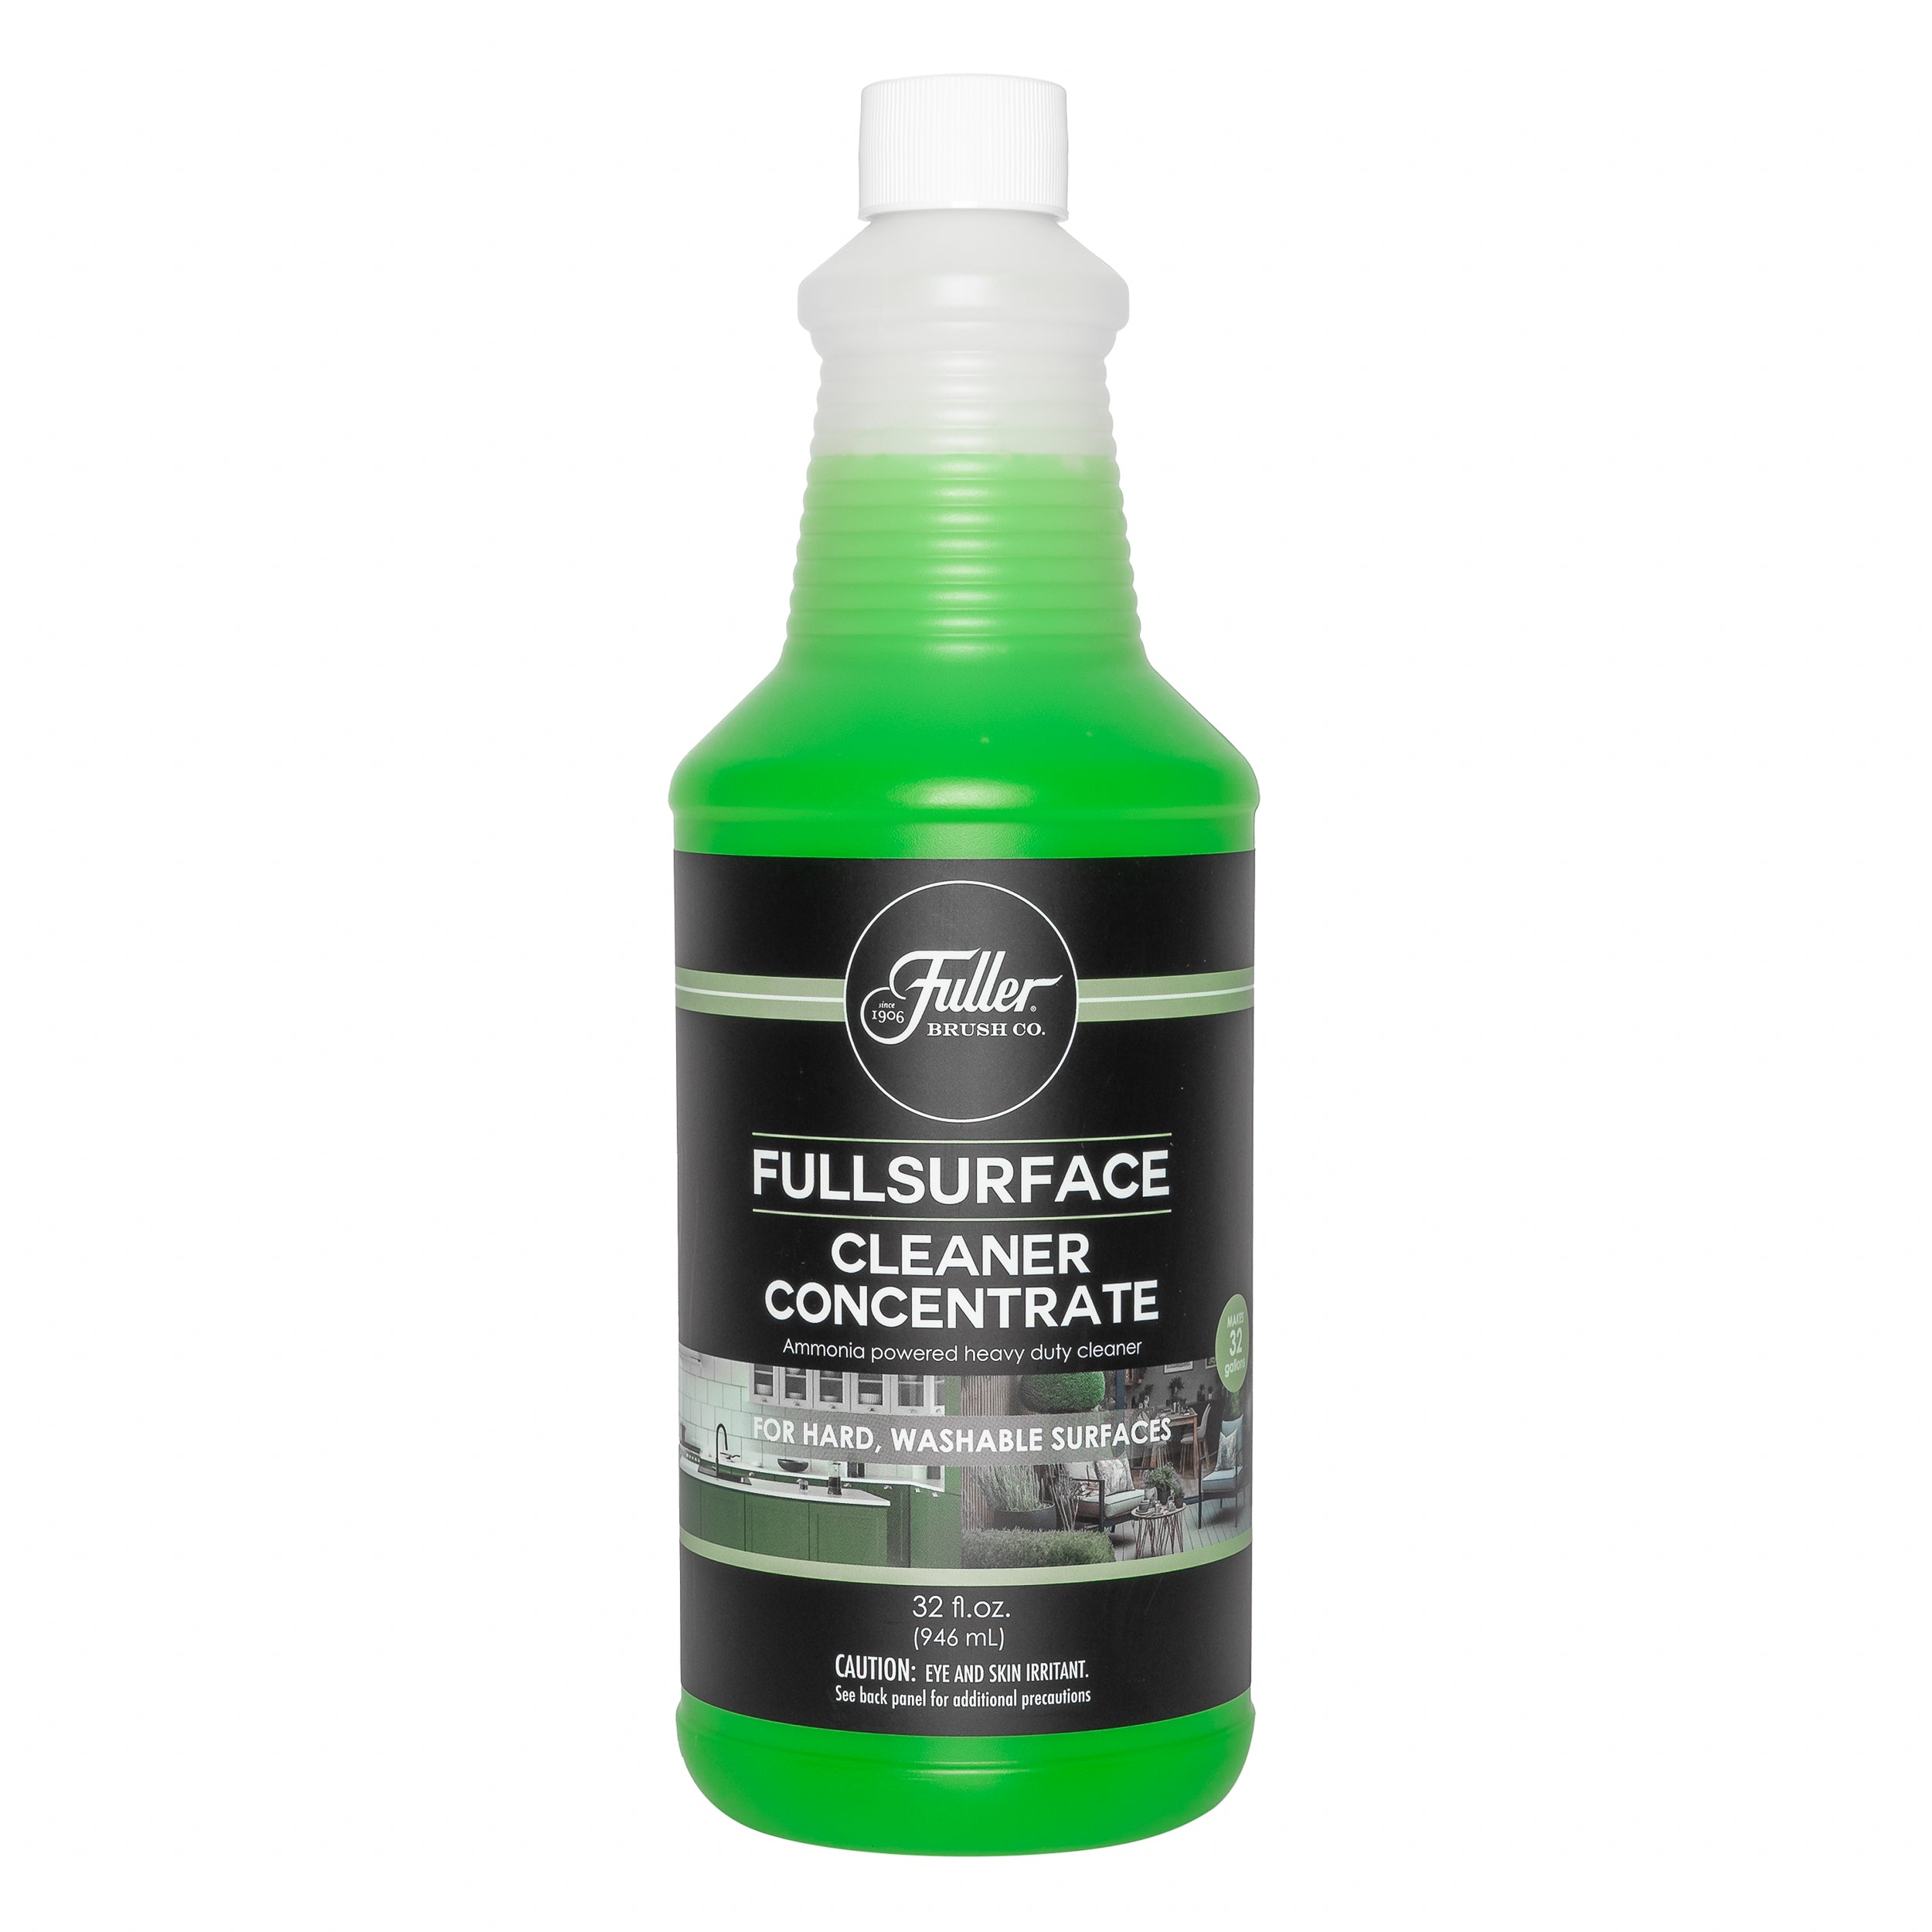 FullSurface Cleaner Concentrate